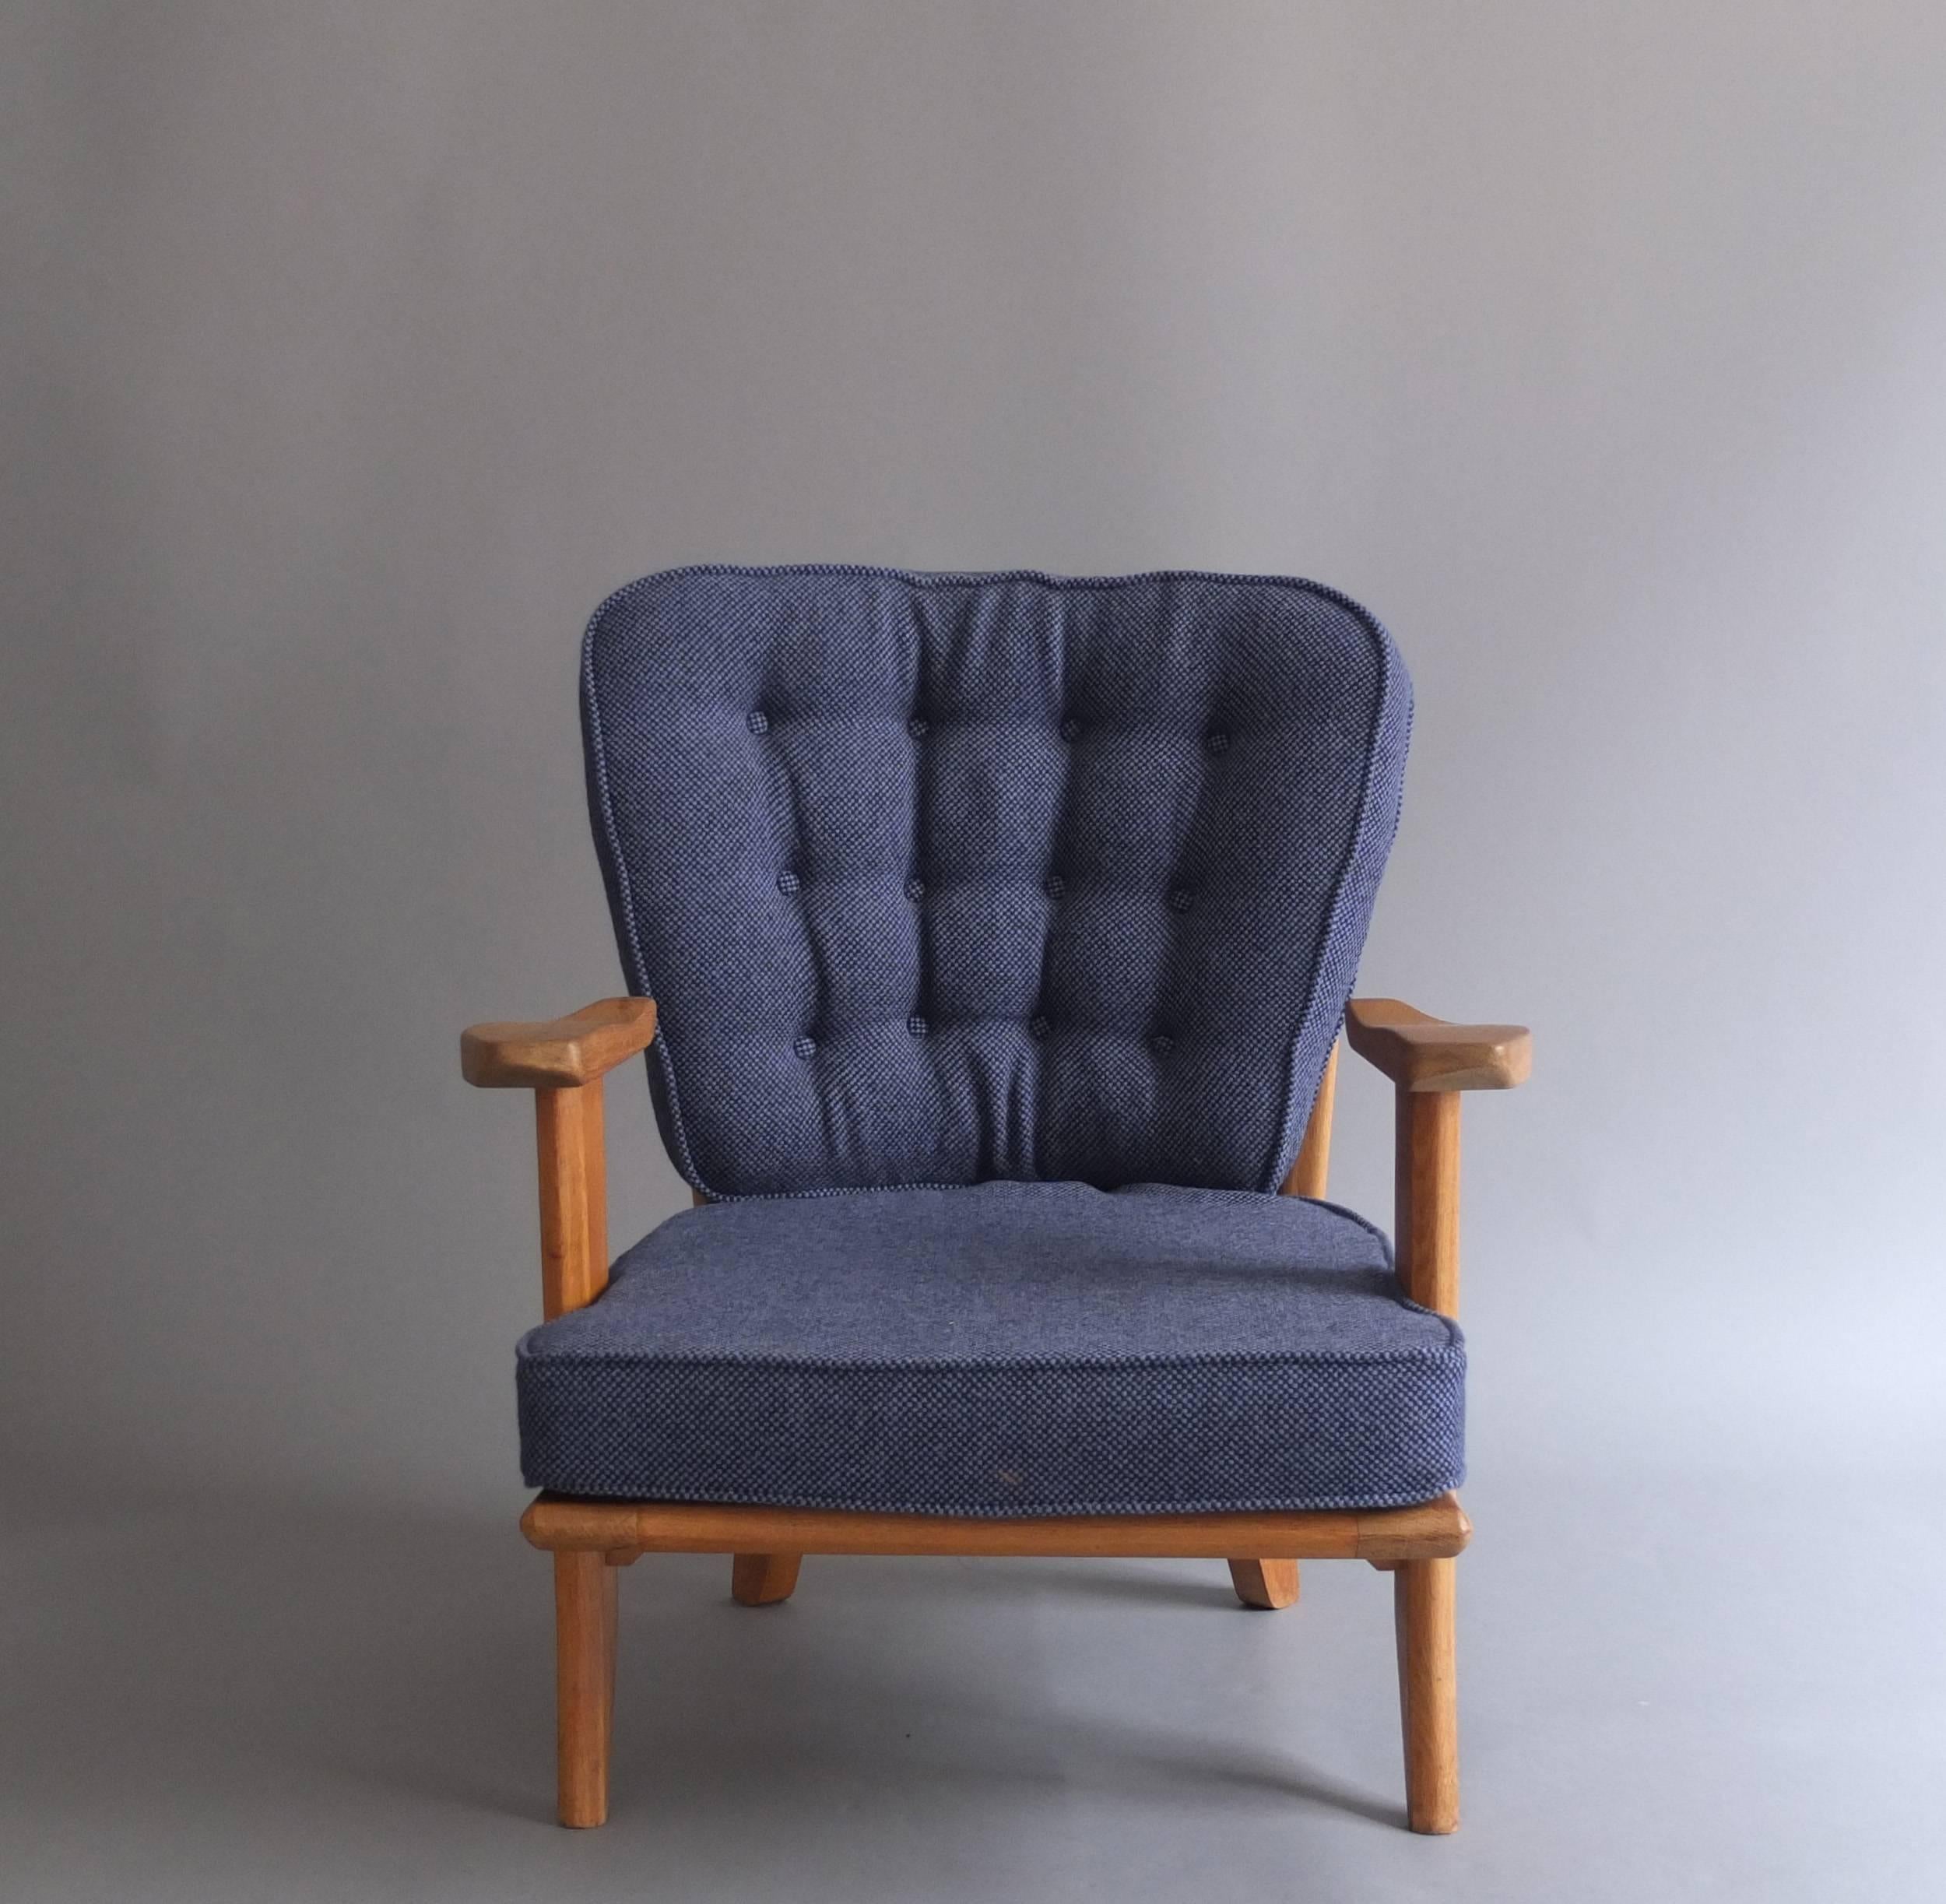 Pair of French 1950s solid oak armchairs by Guillerme & Chambron with their original blue fabric.